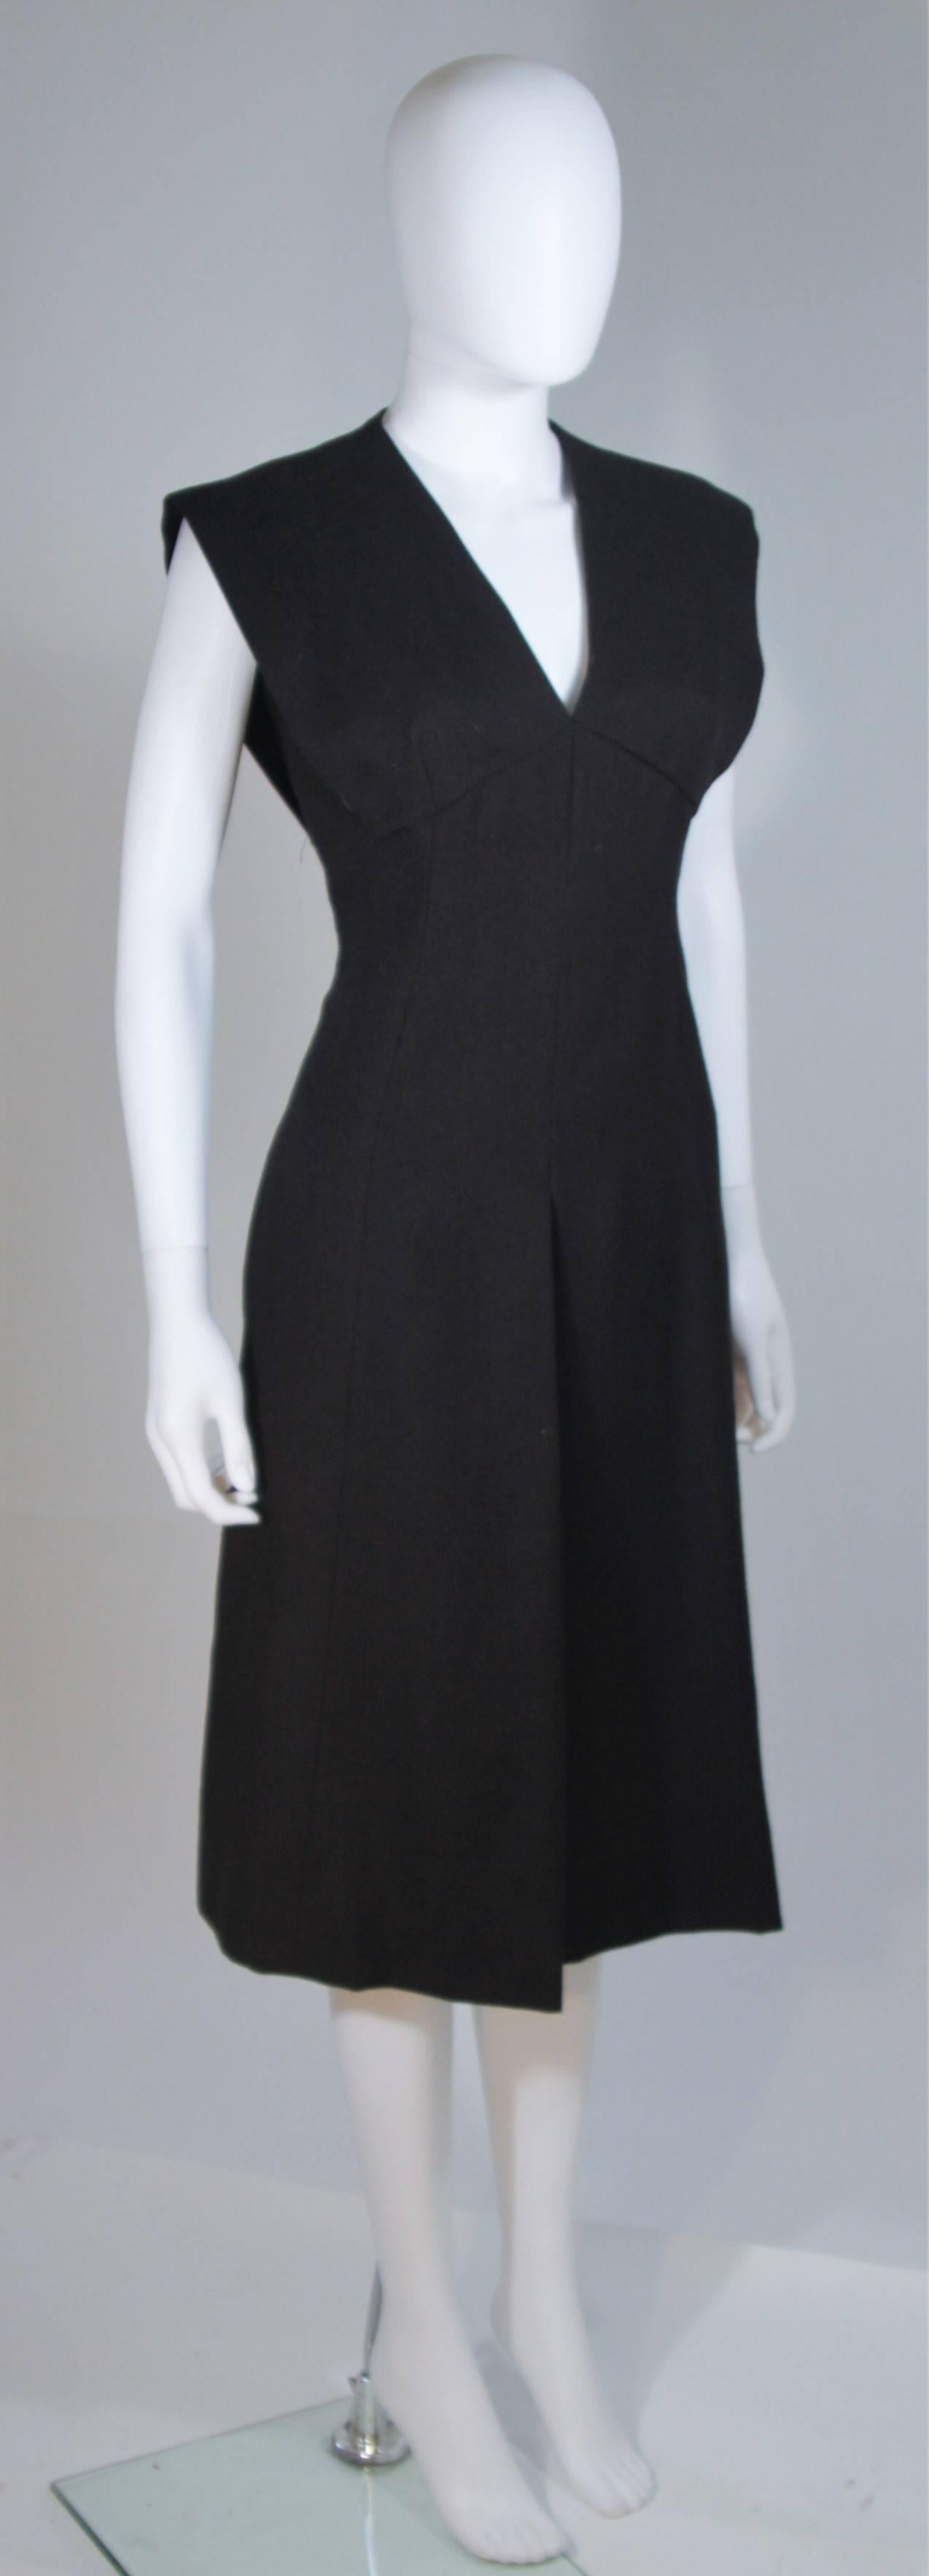 MOLLIE PARNIS 1960's Black Linen A-Line Shift Dress Size 10 In Excellent Condition For Sale In Los Angeles, CA